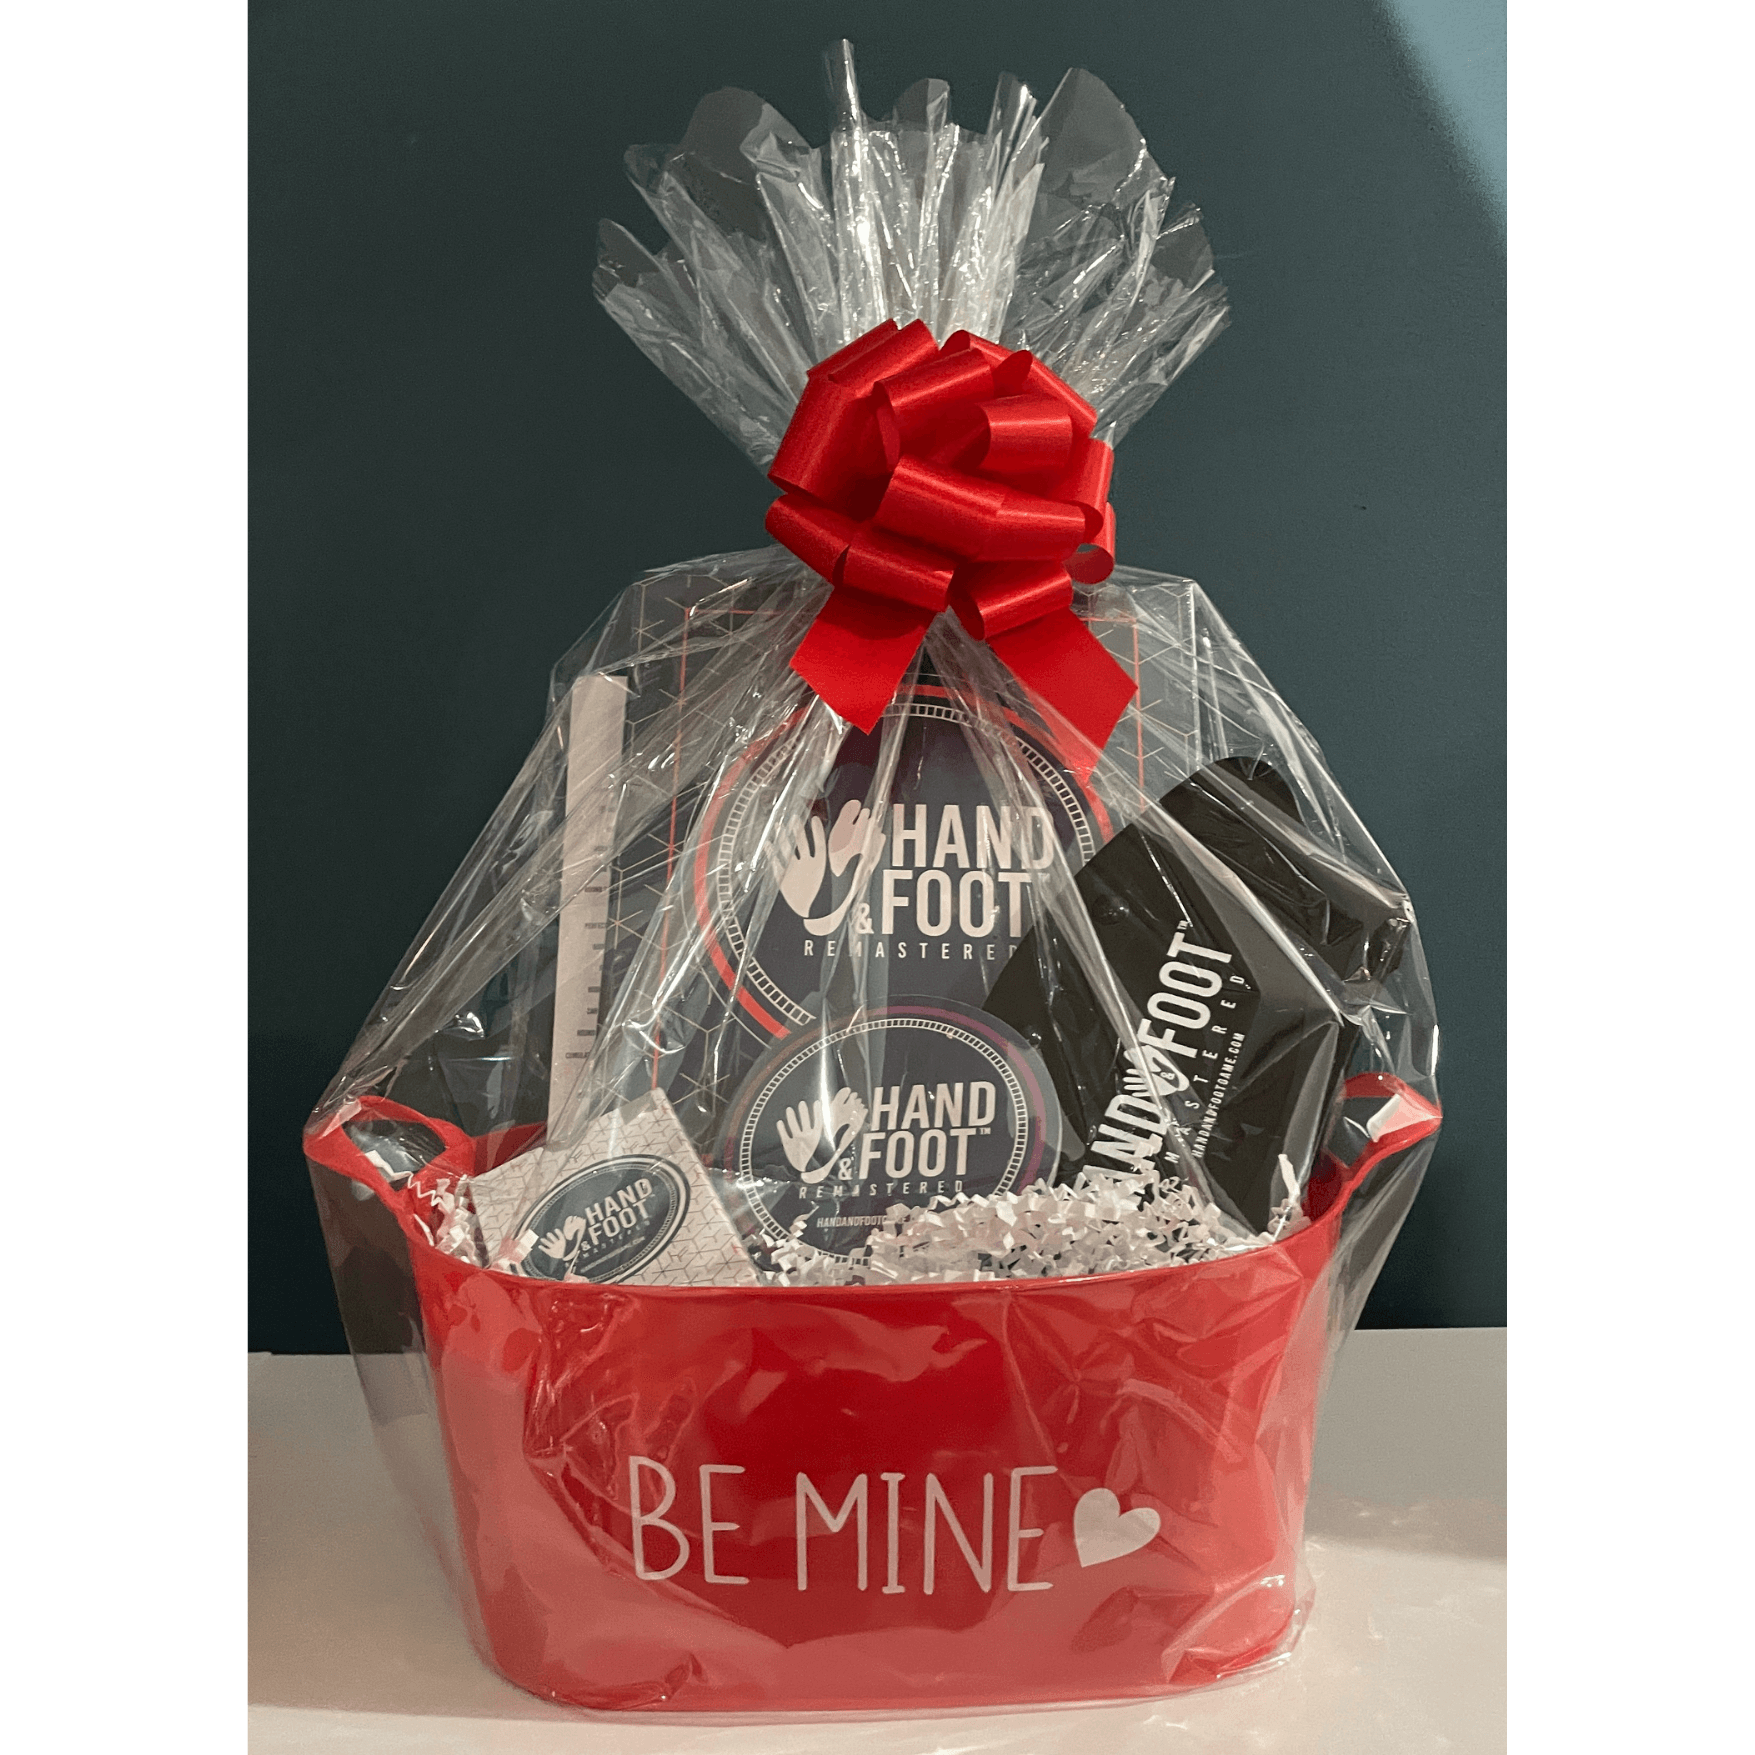 Hand & Foot Remastered 4 Player Valentine's Day Gift Set - Be Mine